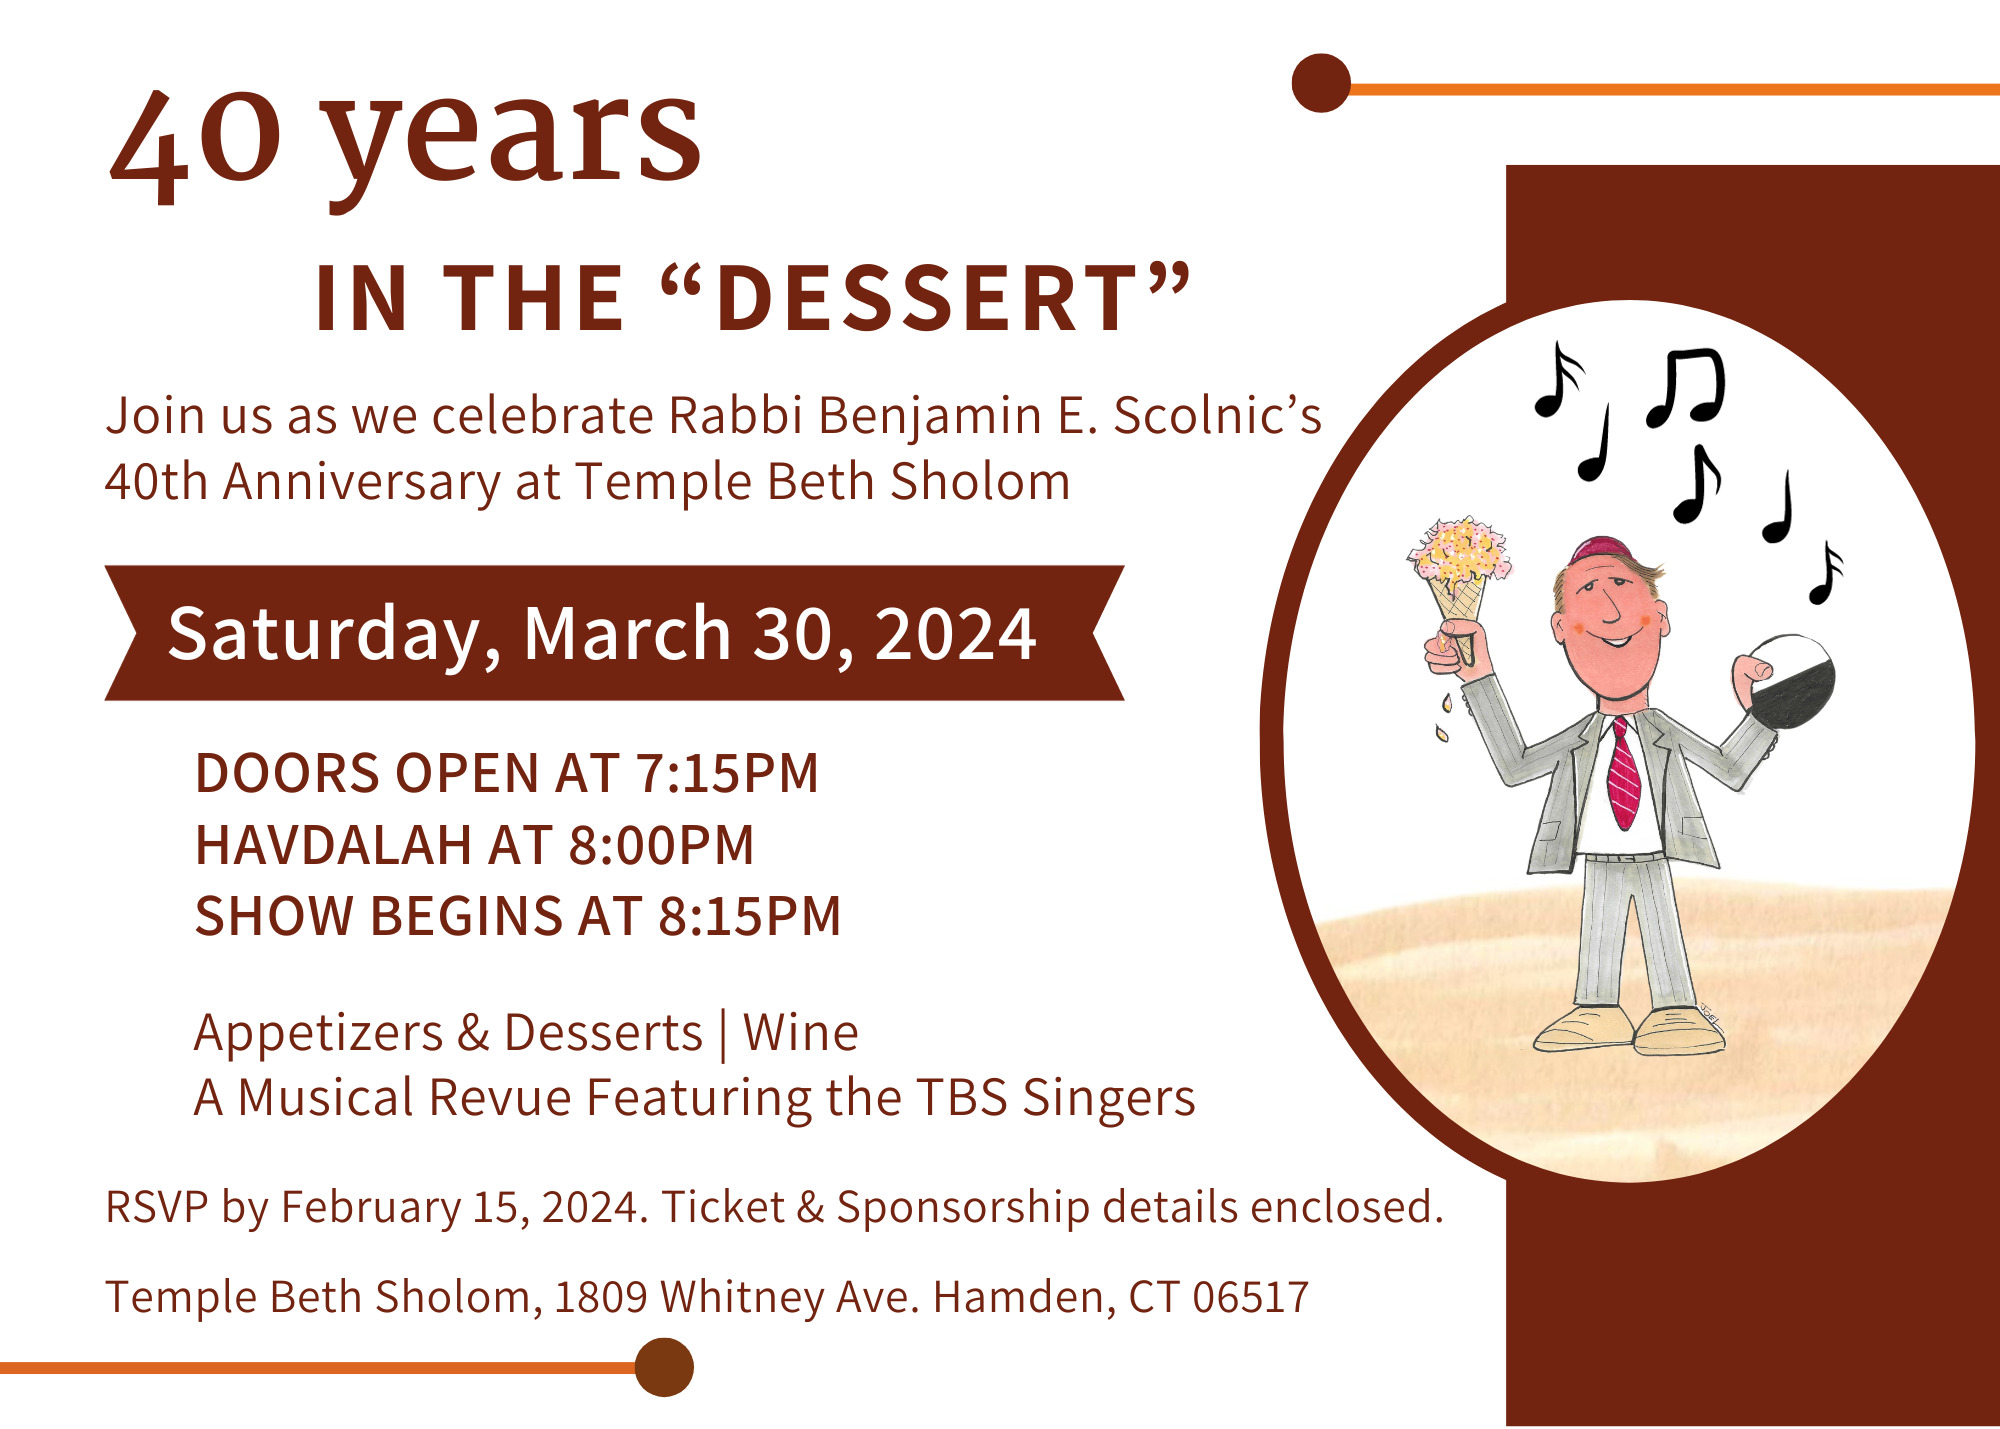 TBS 40 Years In The "Dessert" event Invitation